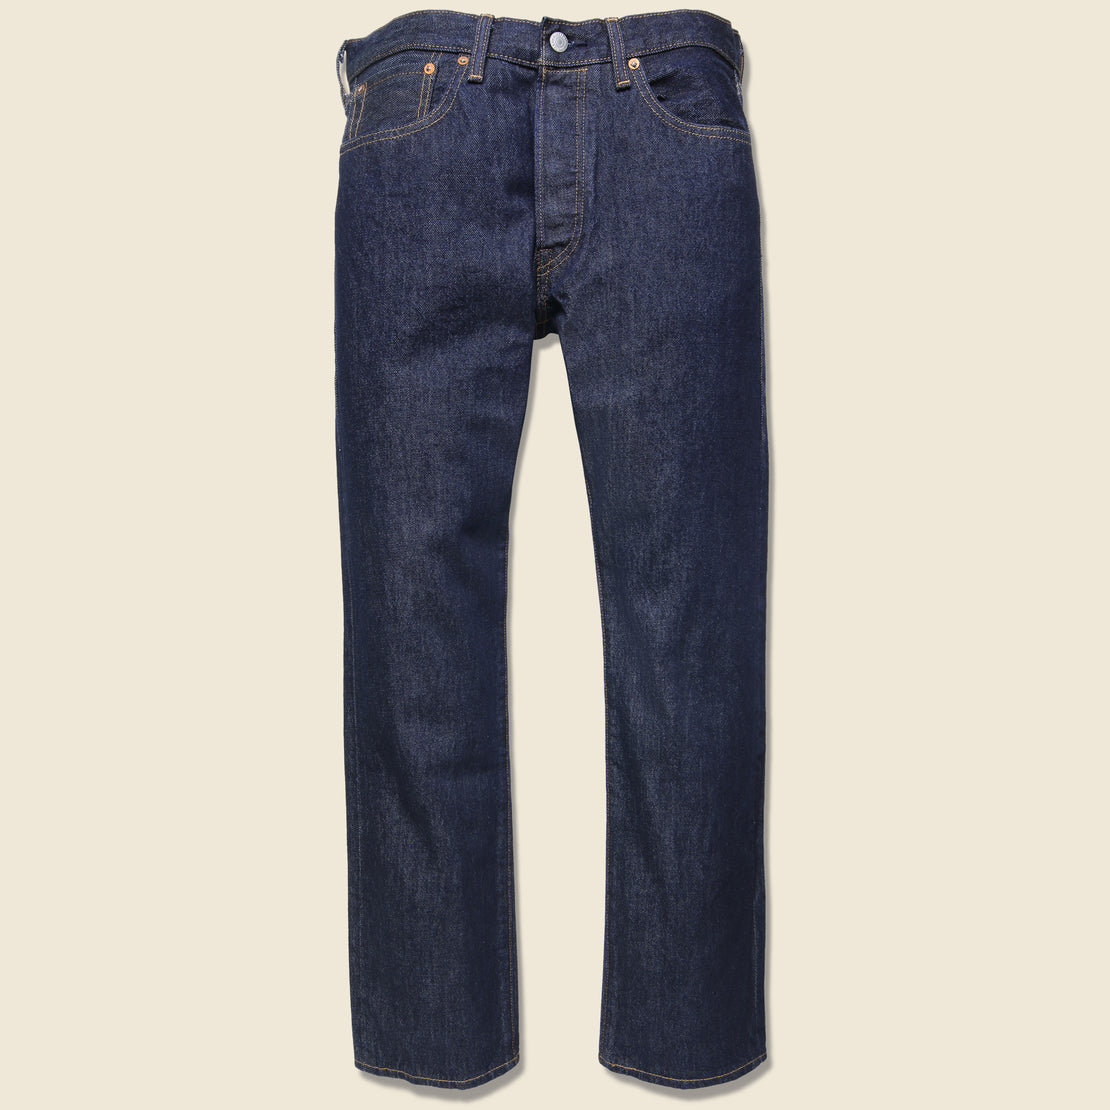 Levis Made & Crafted 501 Original Fit Jean - Rinse